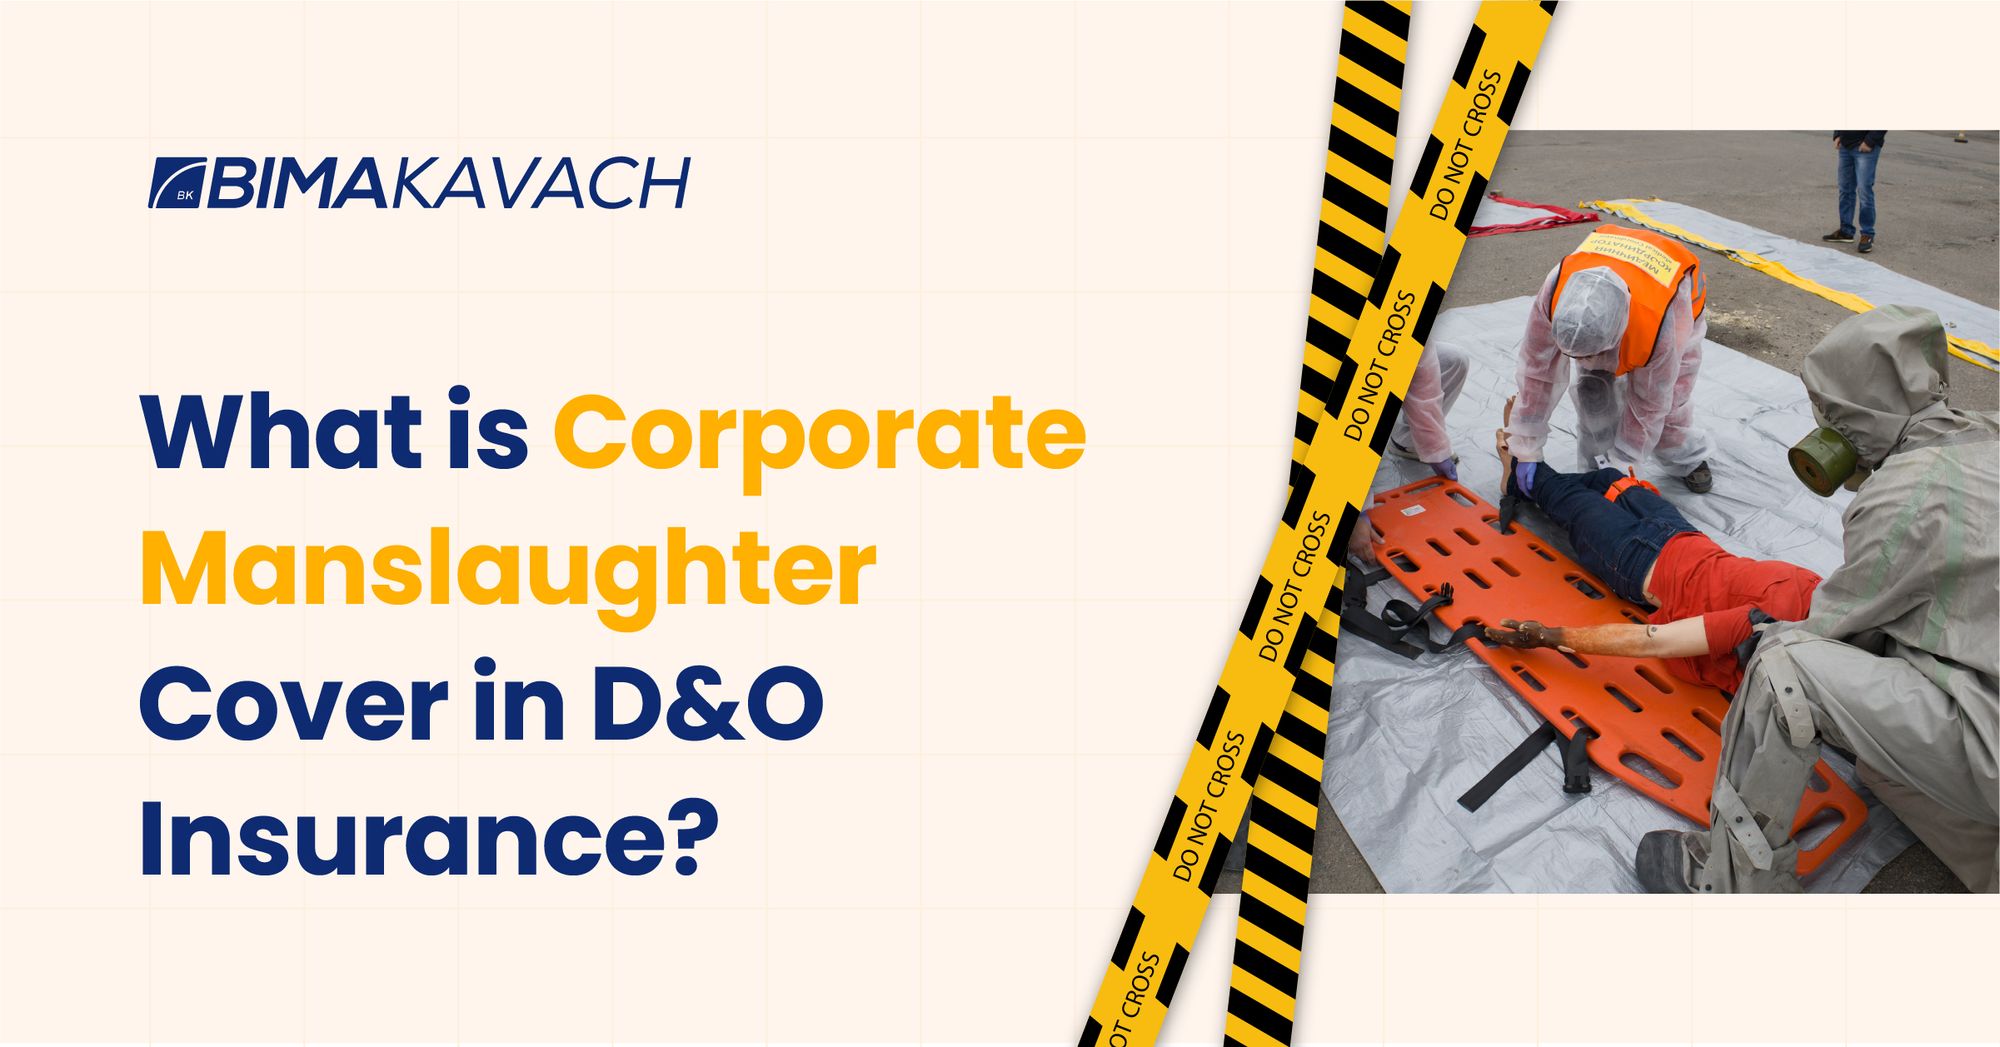 What is Corporate Manslaughter Cover in D&O Insurance?